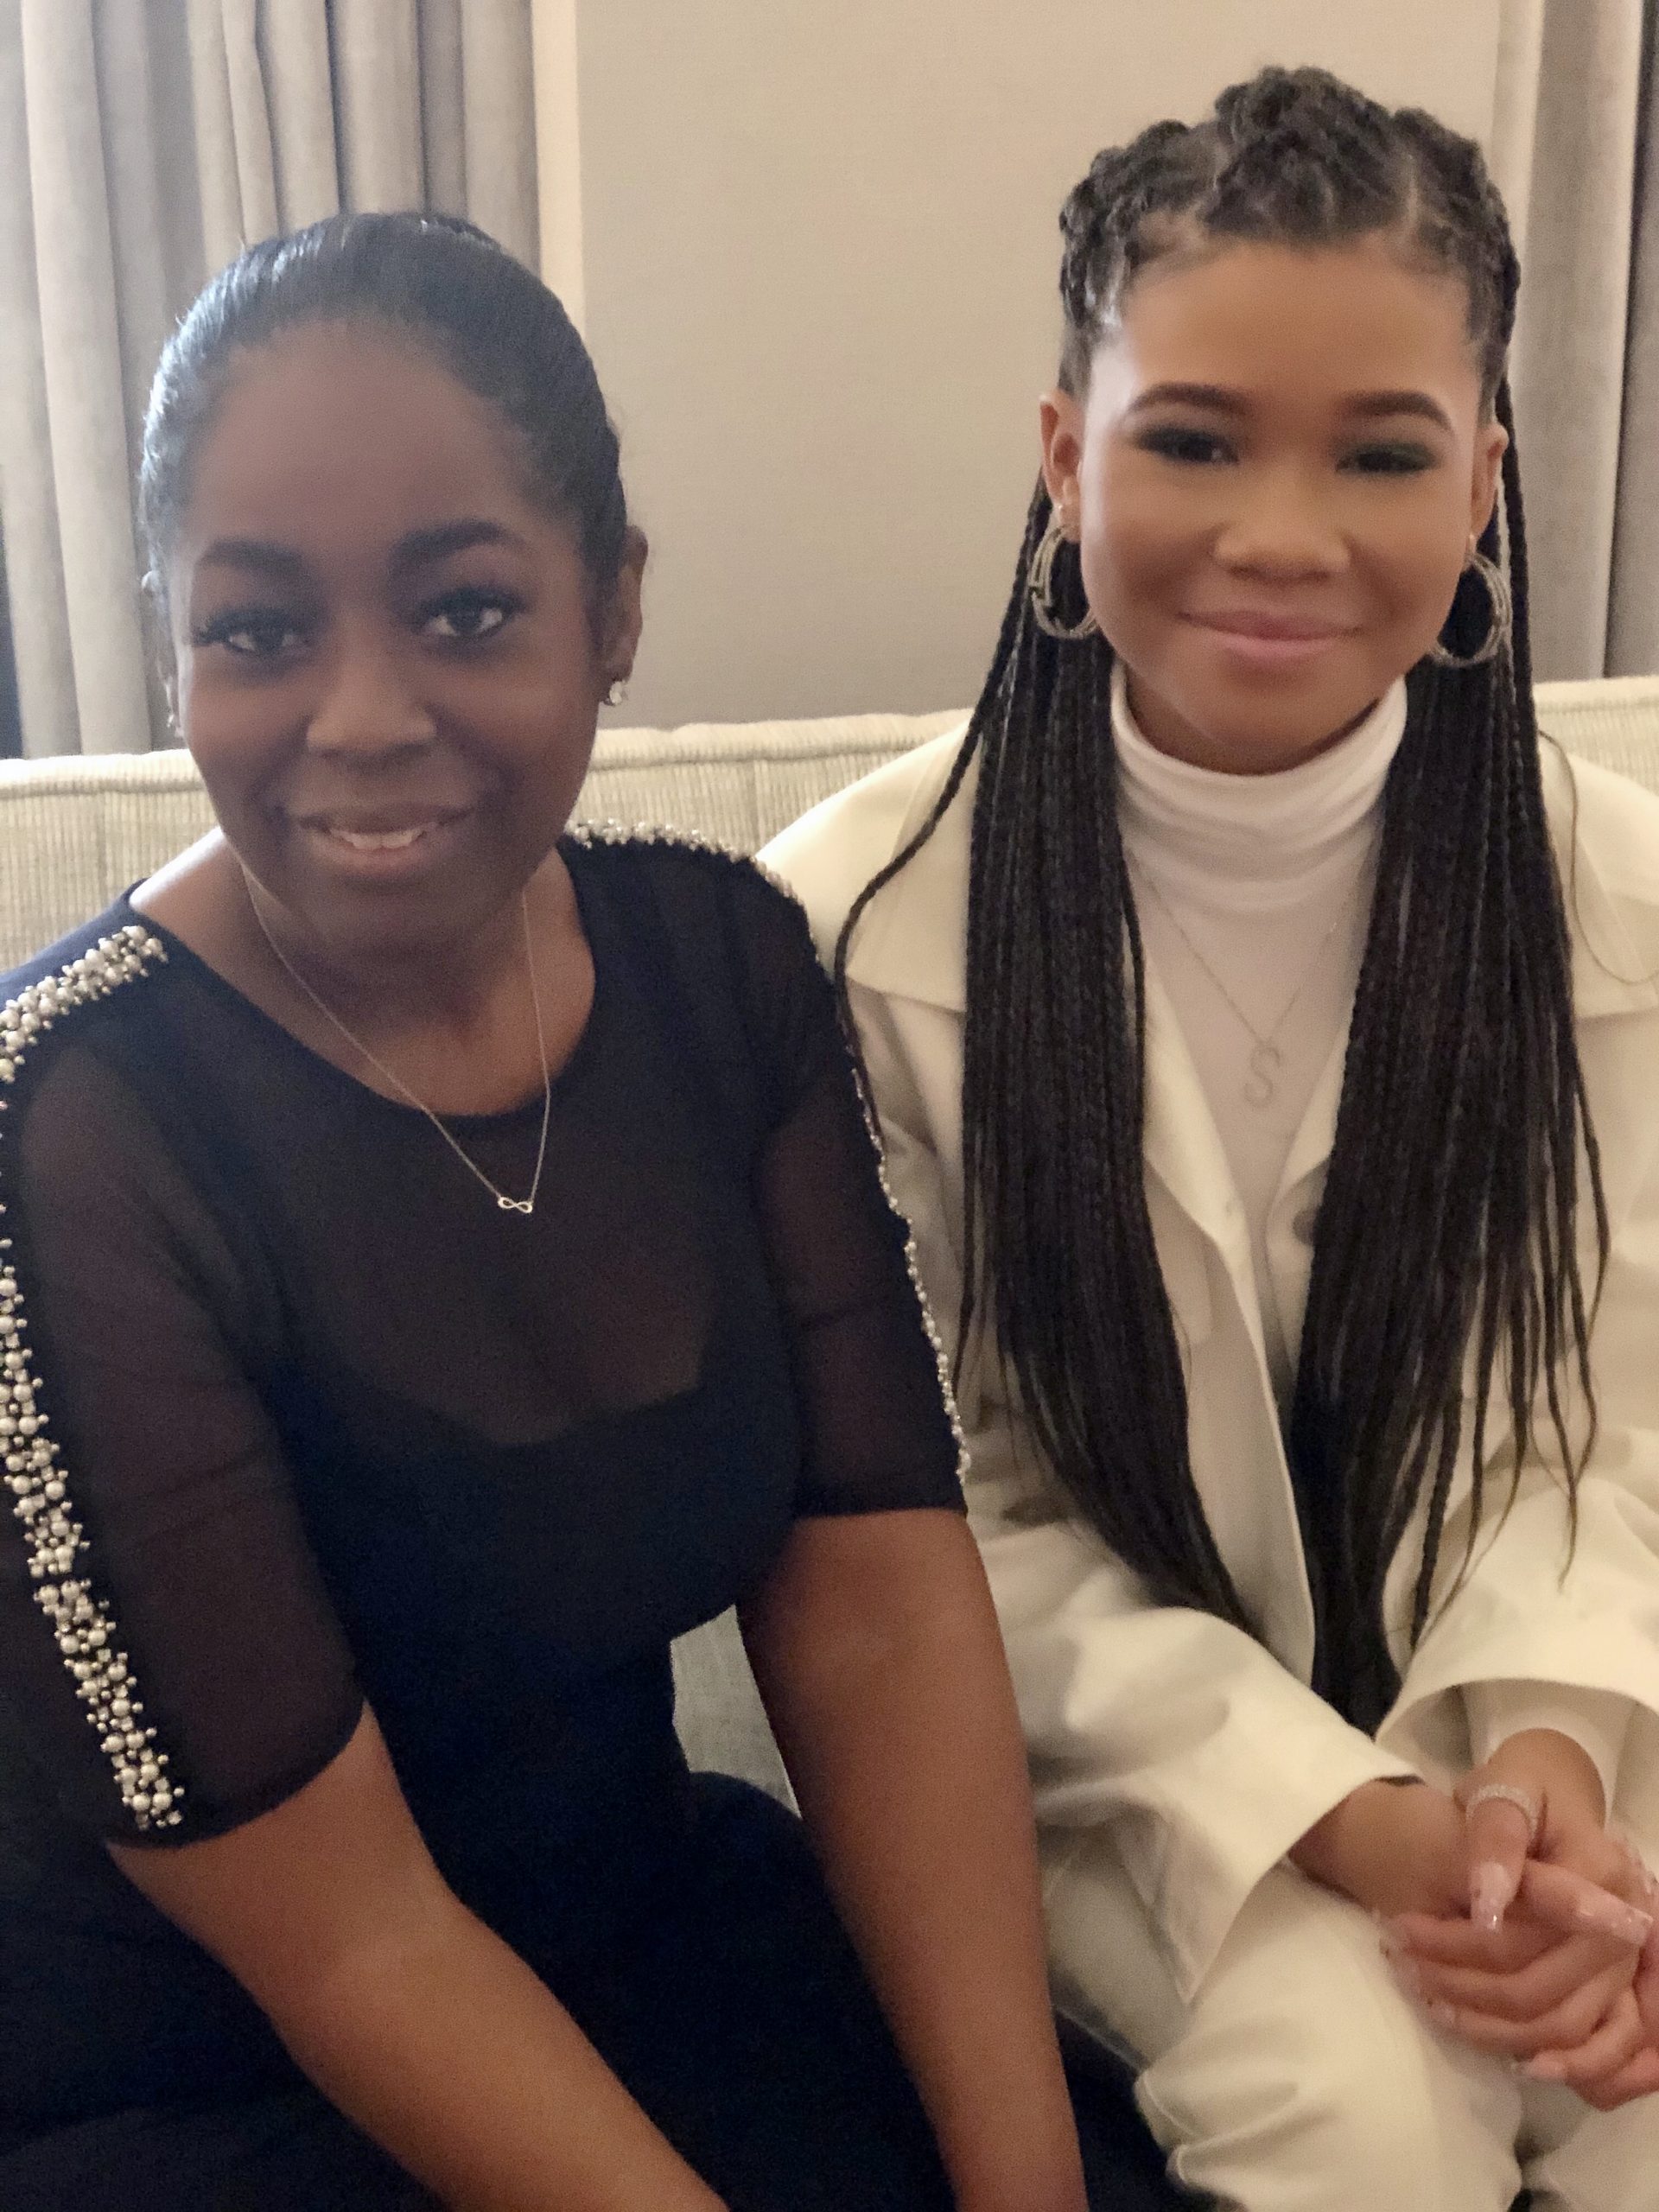 Roundtable Discussion With Actress & Atlanta Native Storm Reid About Her New Film ‘Invisible Man’